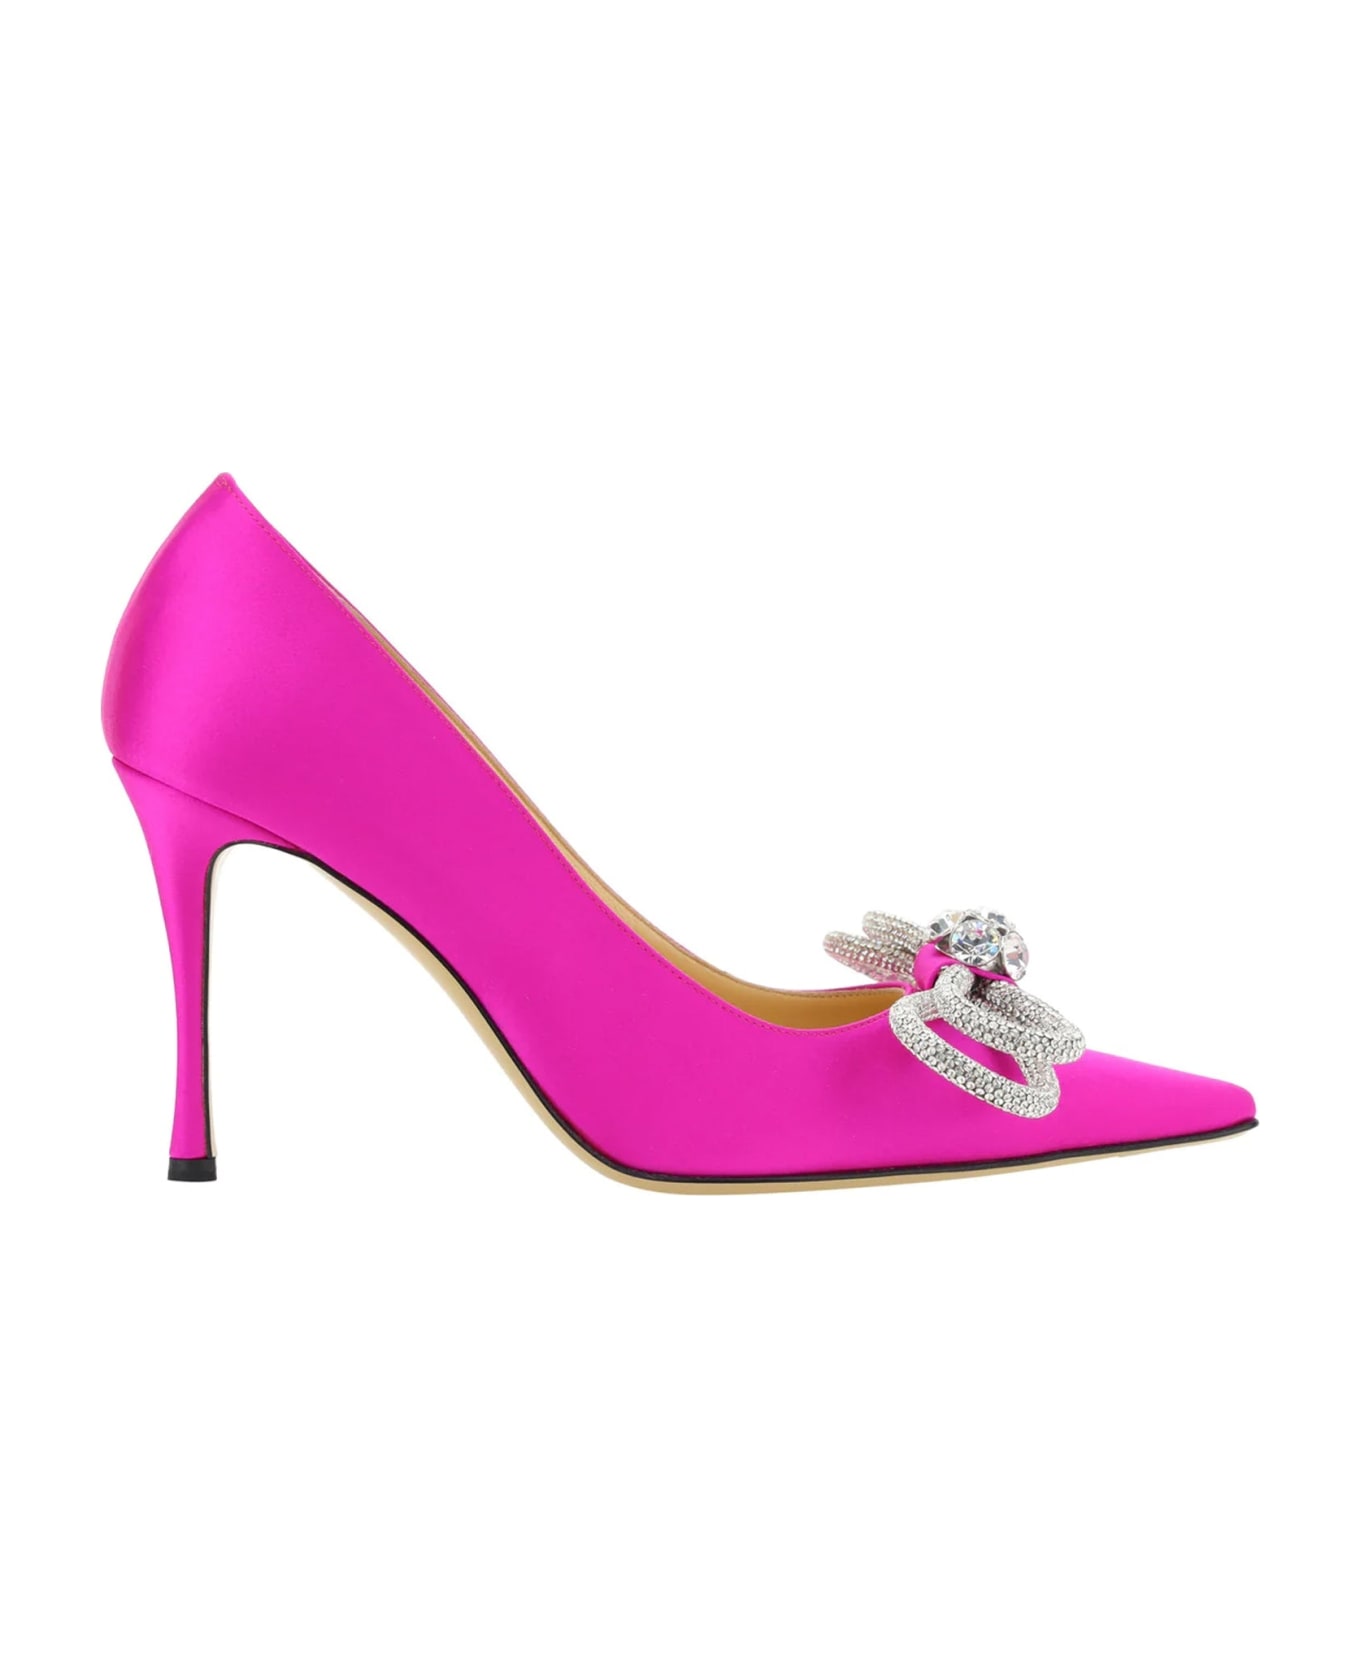 Mach & Mach Double Bow Satin Pumps - Pink ハイヒール